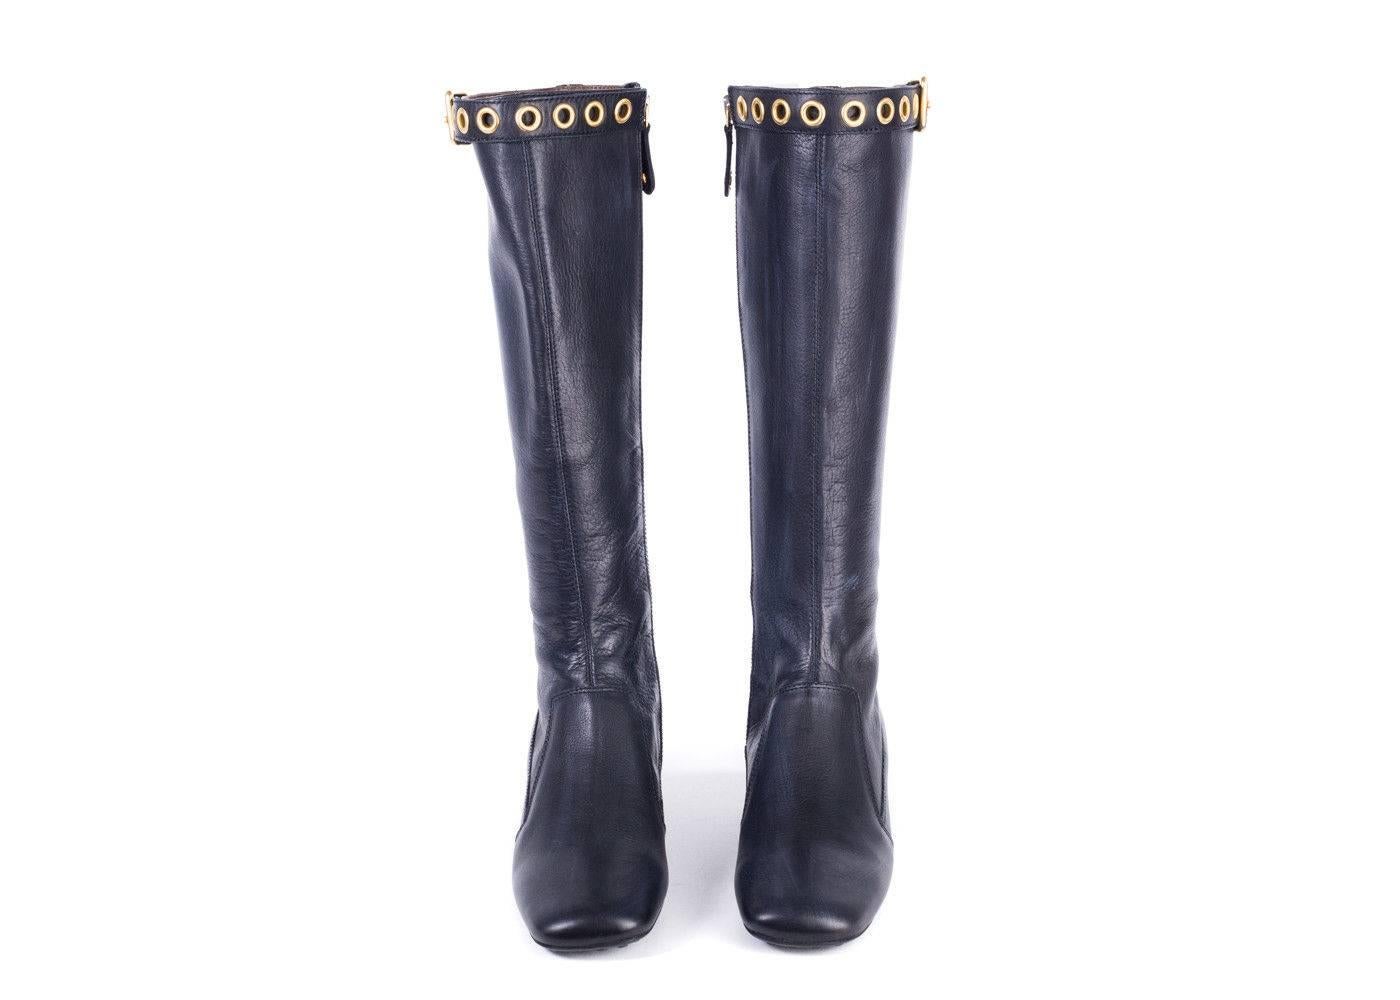 Brand New Car Shoe Tall Boots
Original Box Included
Retails in Stores & Online for $785
Size IT39.5 / US9.5 Fits True to Size

Car Shoe's rendition of a pair of classic black tall mid calf boots for this fall season. The boots feature gold buckle